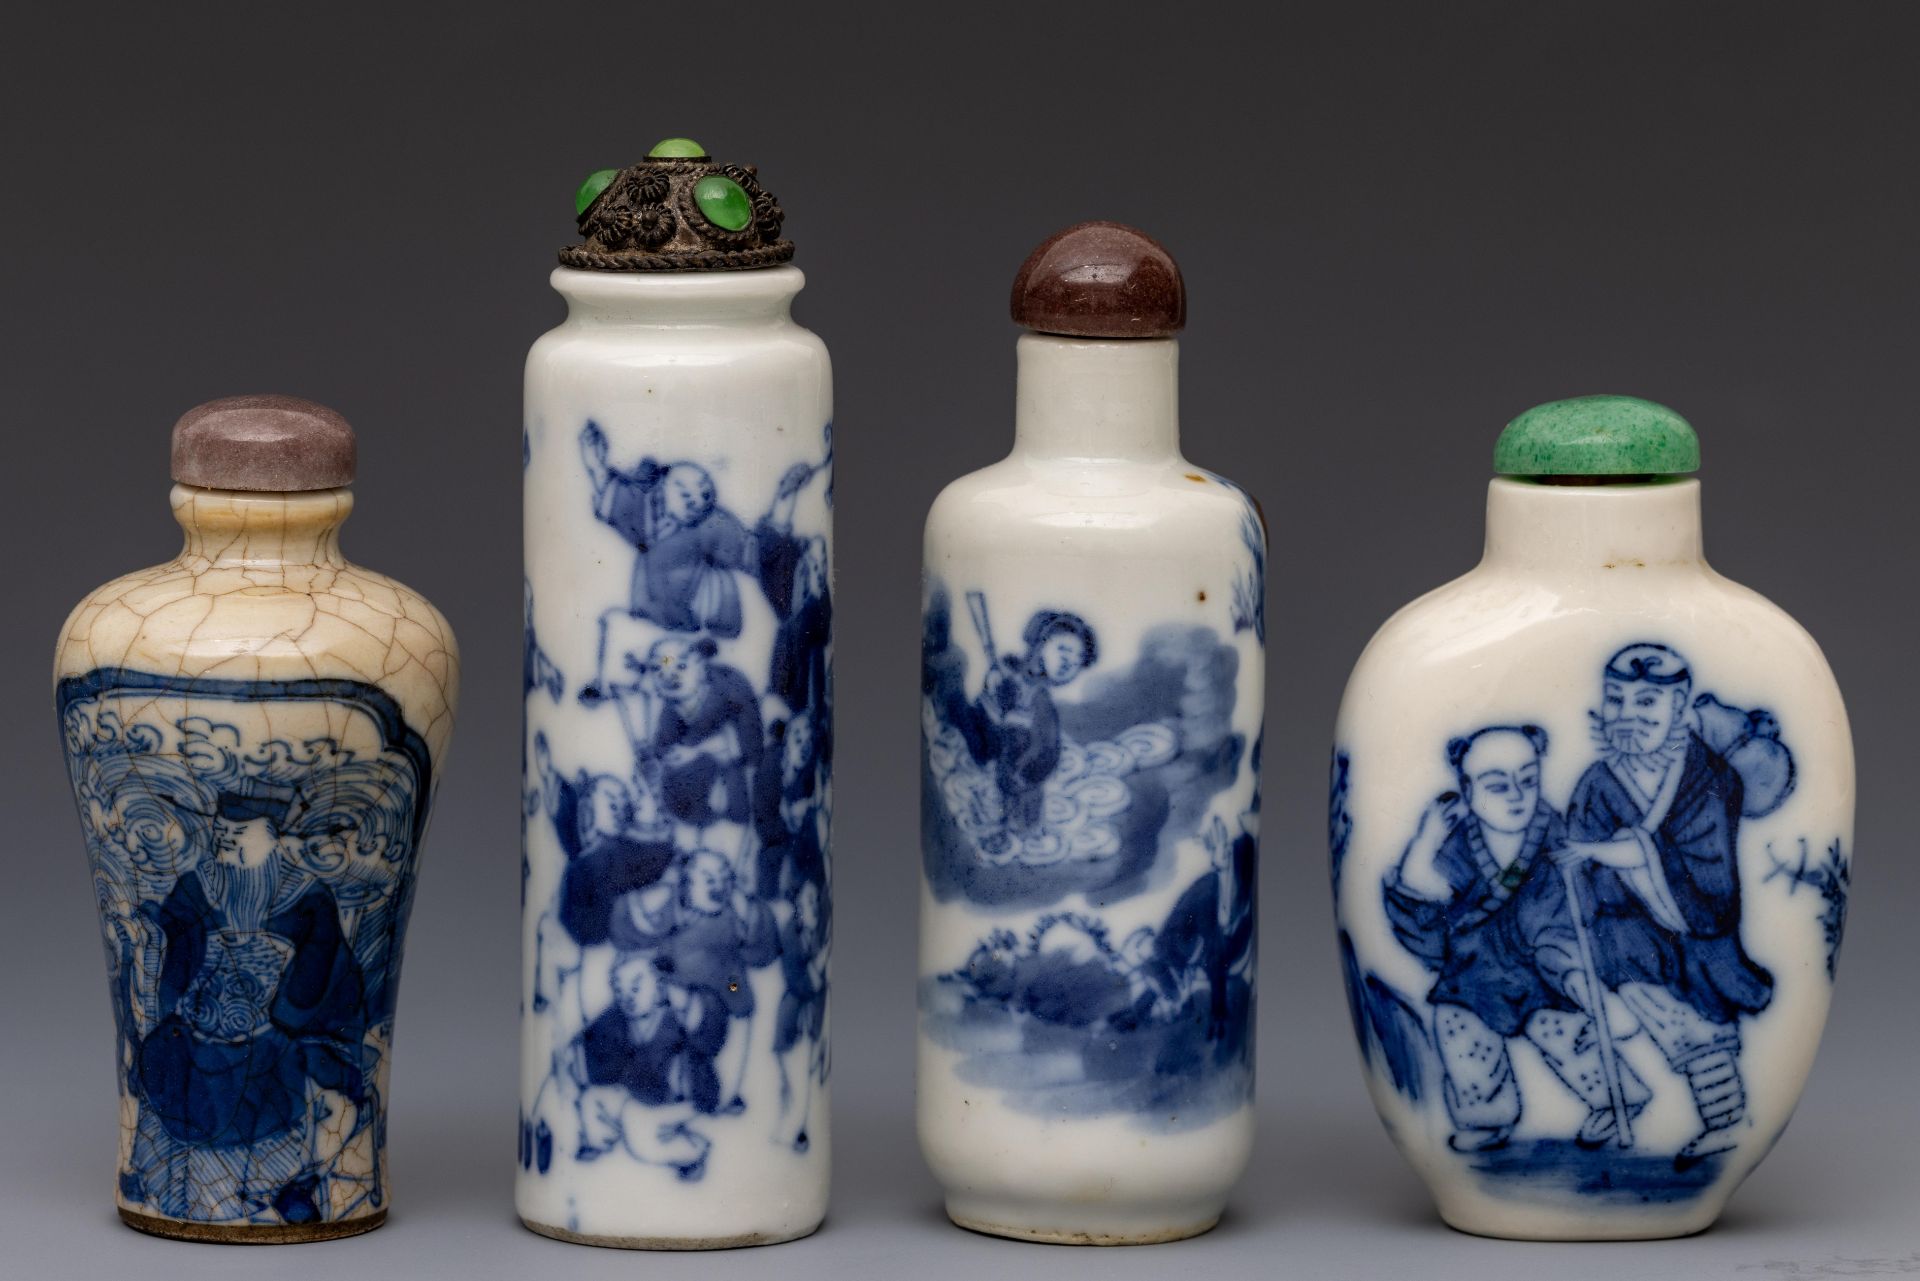 China, four blue and white porcelain figural snuff bottles and stoppers, 19th-20th century,